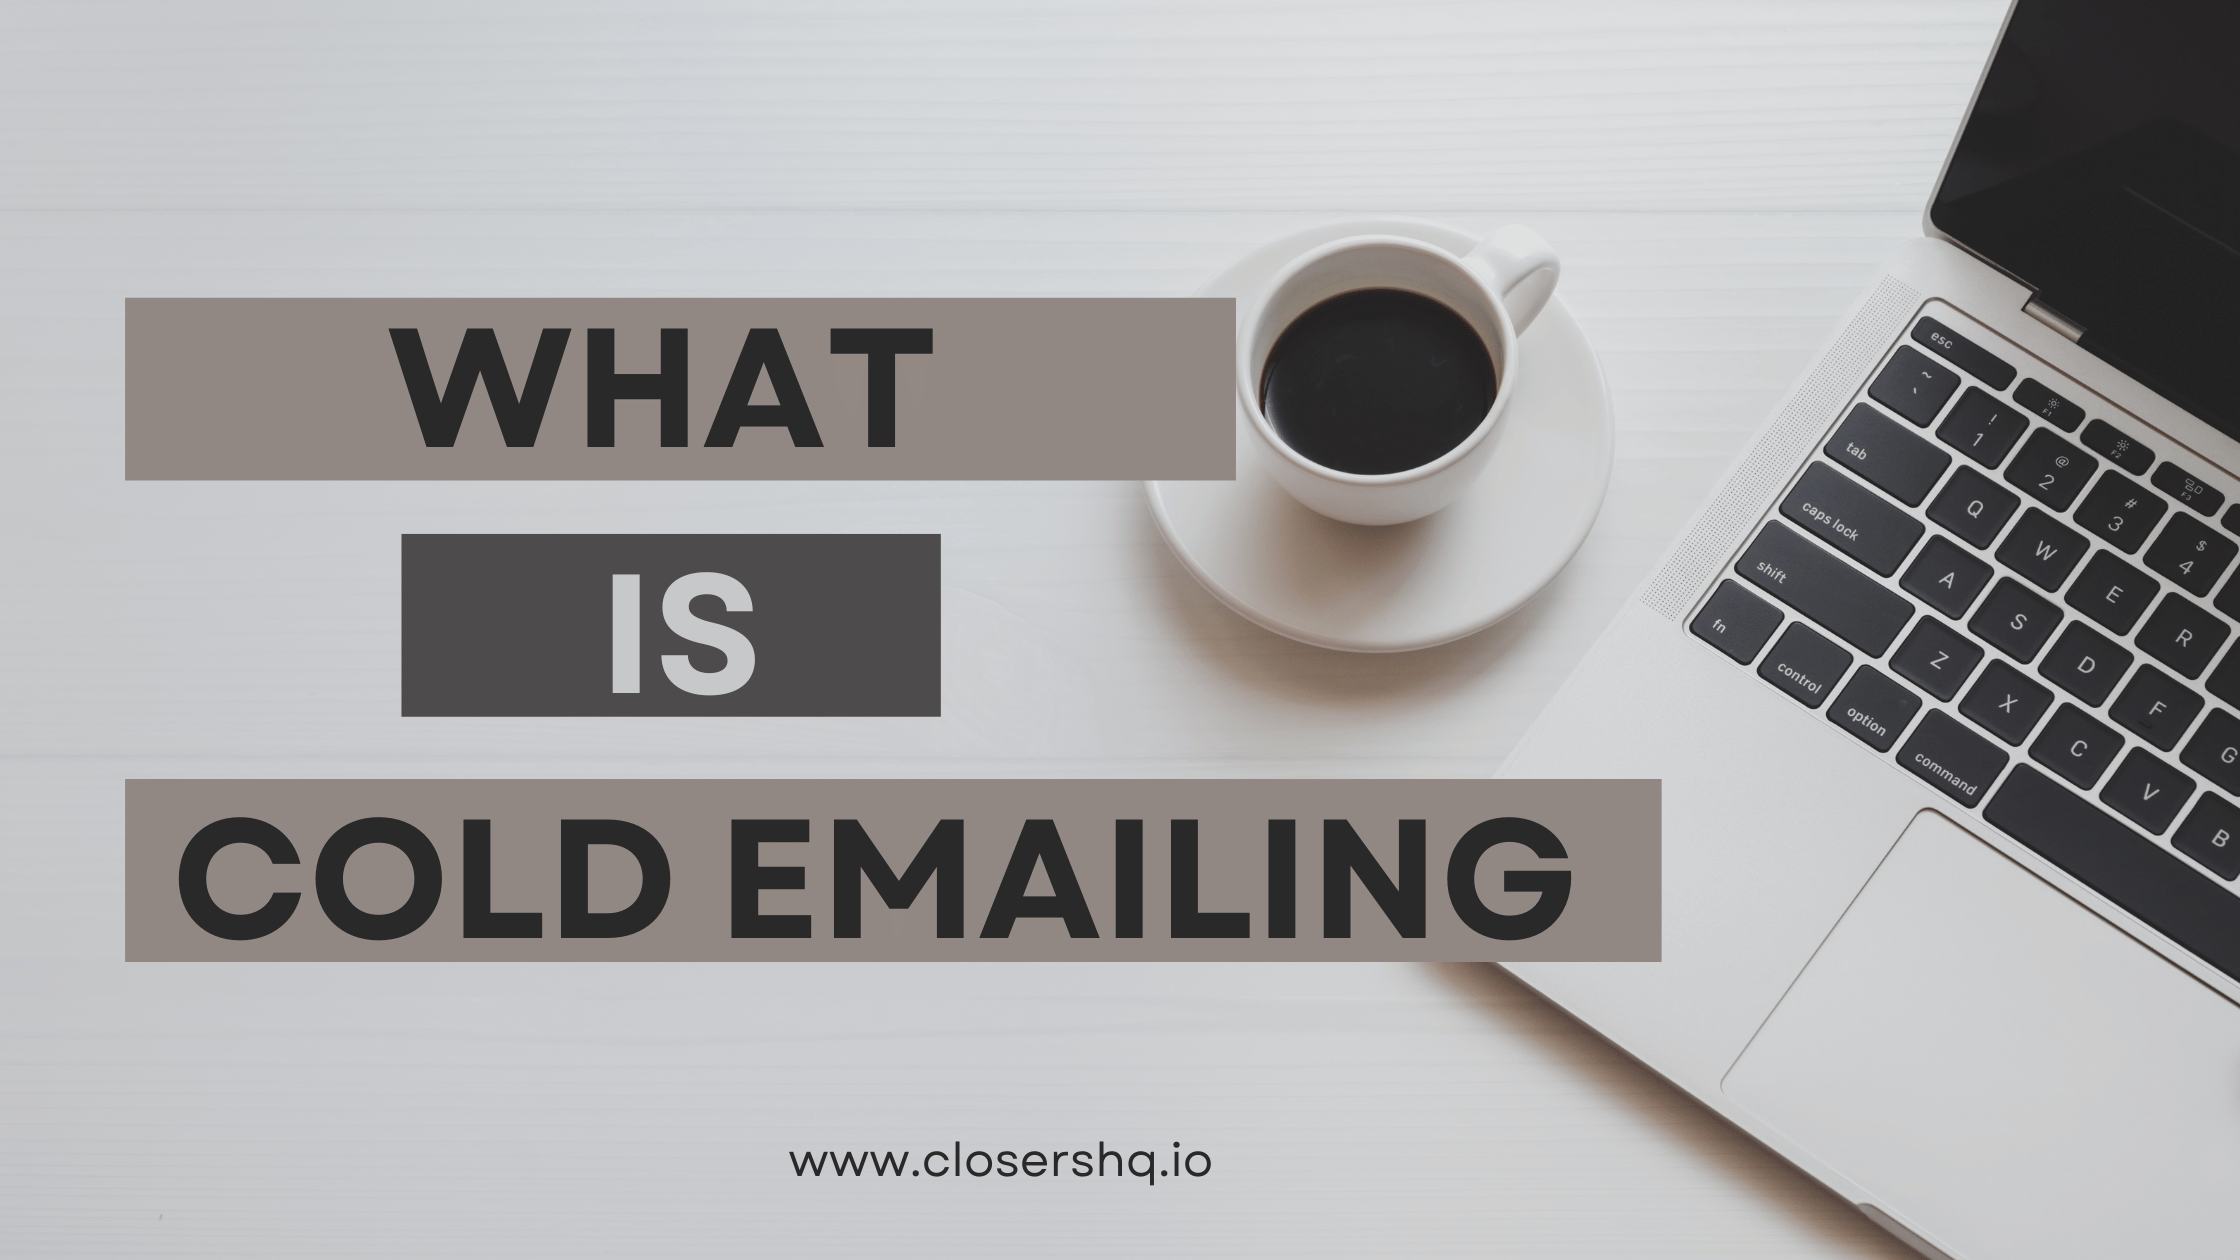 What is Cold Emailing?